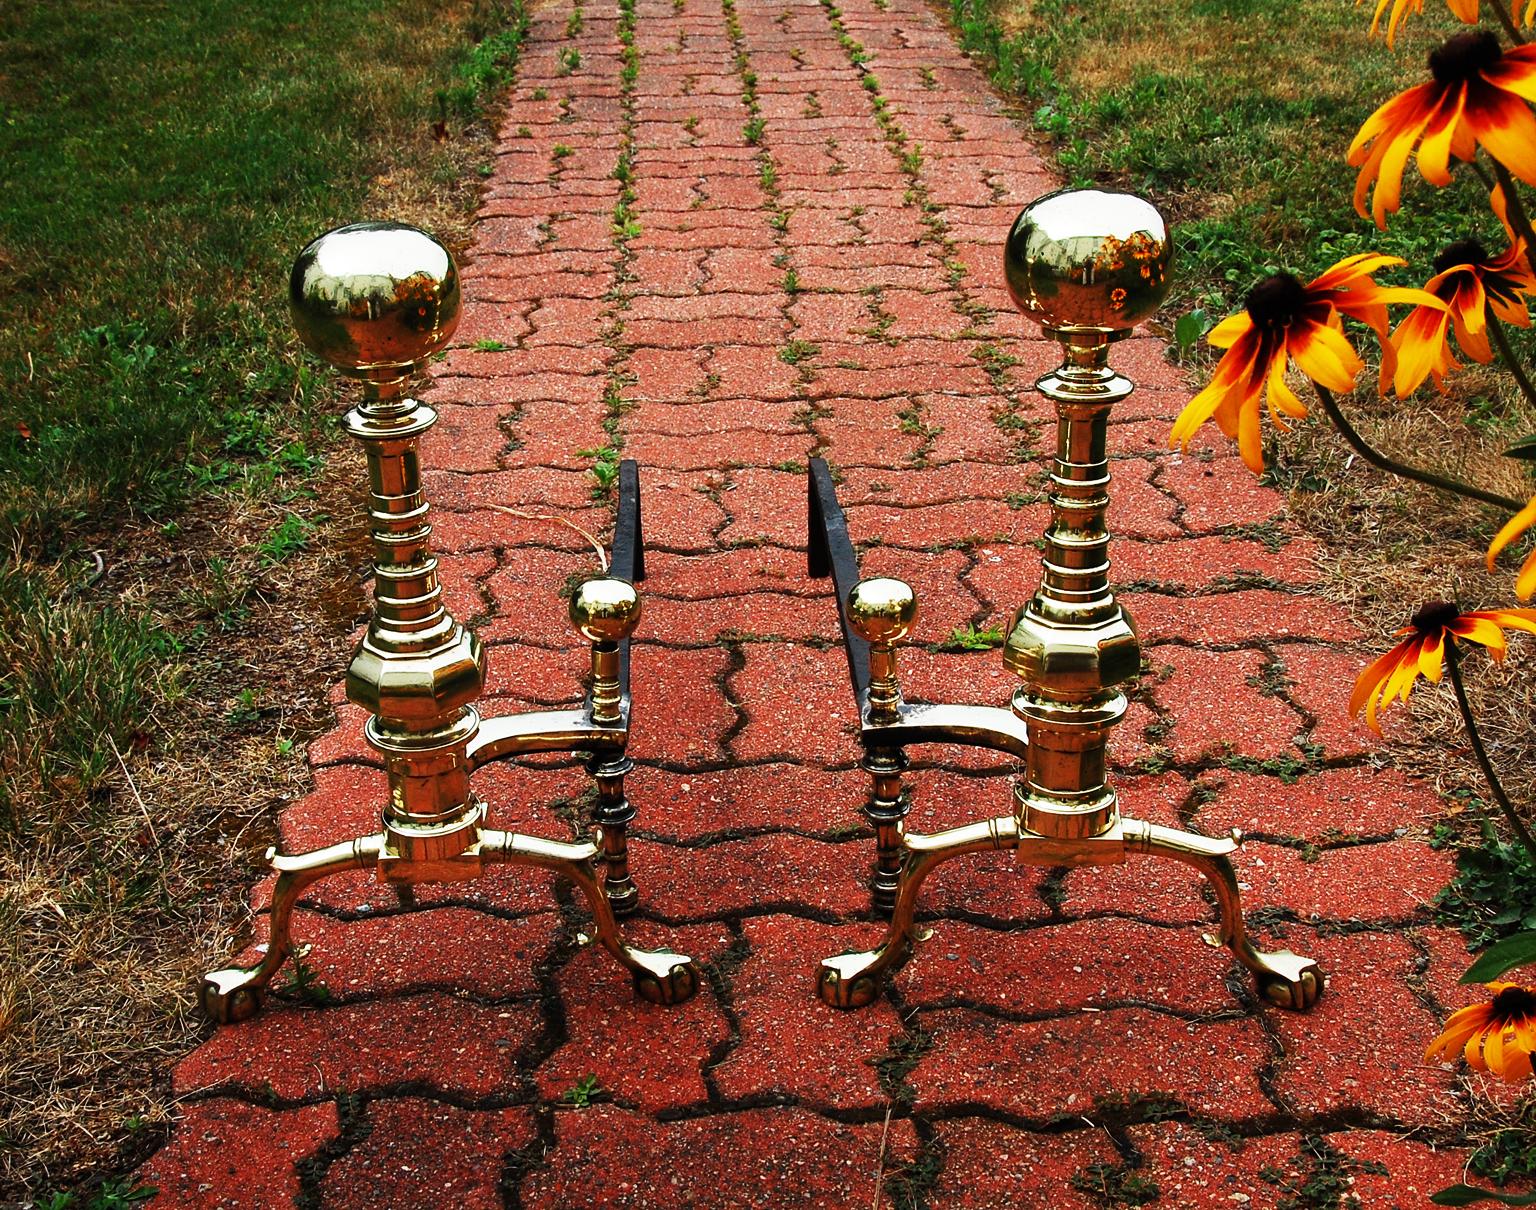 American cast brass mid 19th century Andirons of unusual pattern. These bold 20 1/2 inch high ball top andirons are distinguished by having a column, often referred to as a beehive column, which supports the ball tops. This unusual column sits on